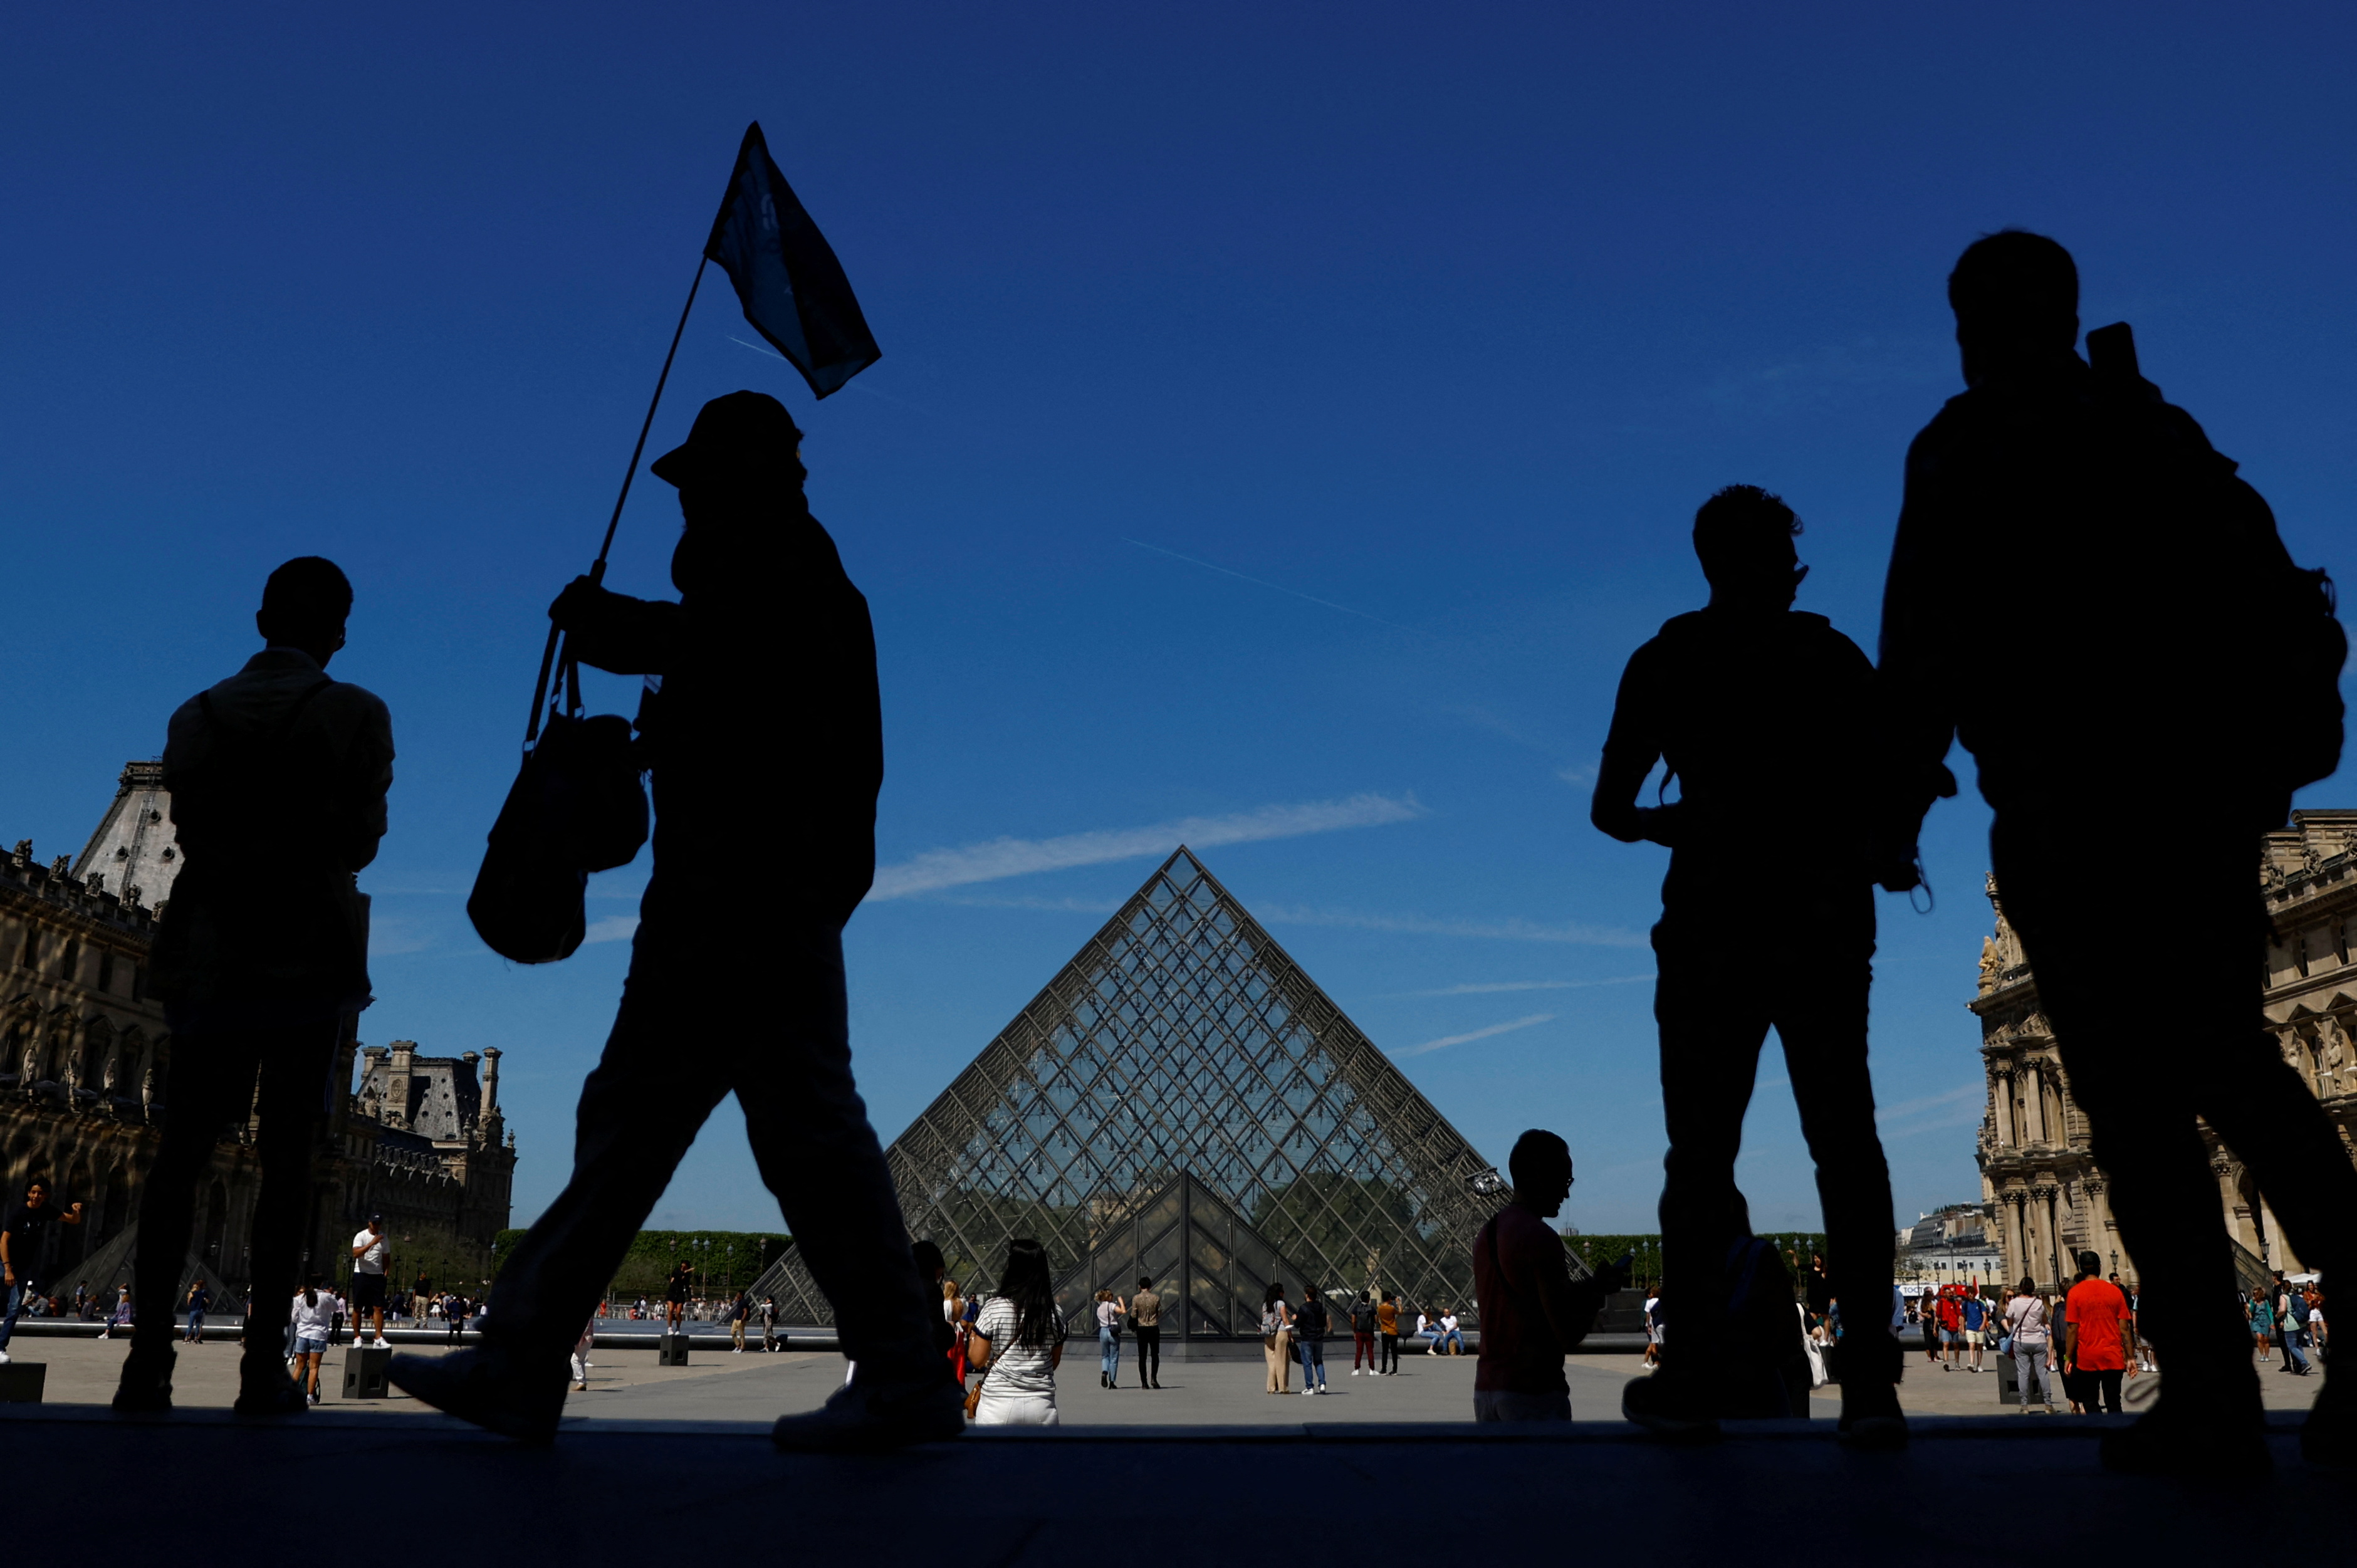 Tourists walk near the glass Pyramid of the Louvre museum in Paris